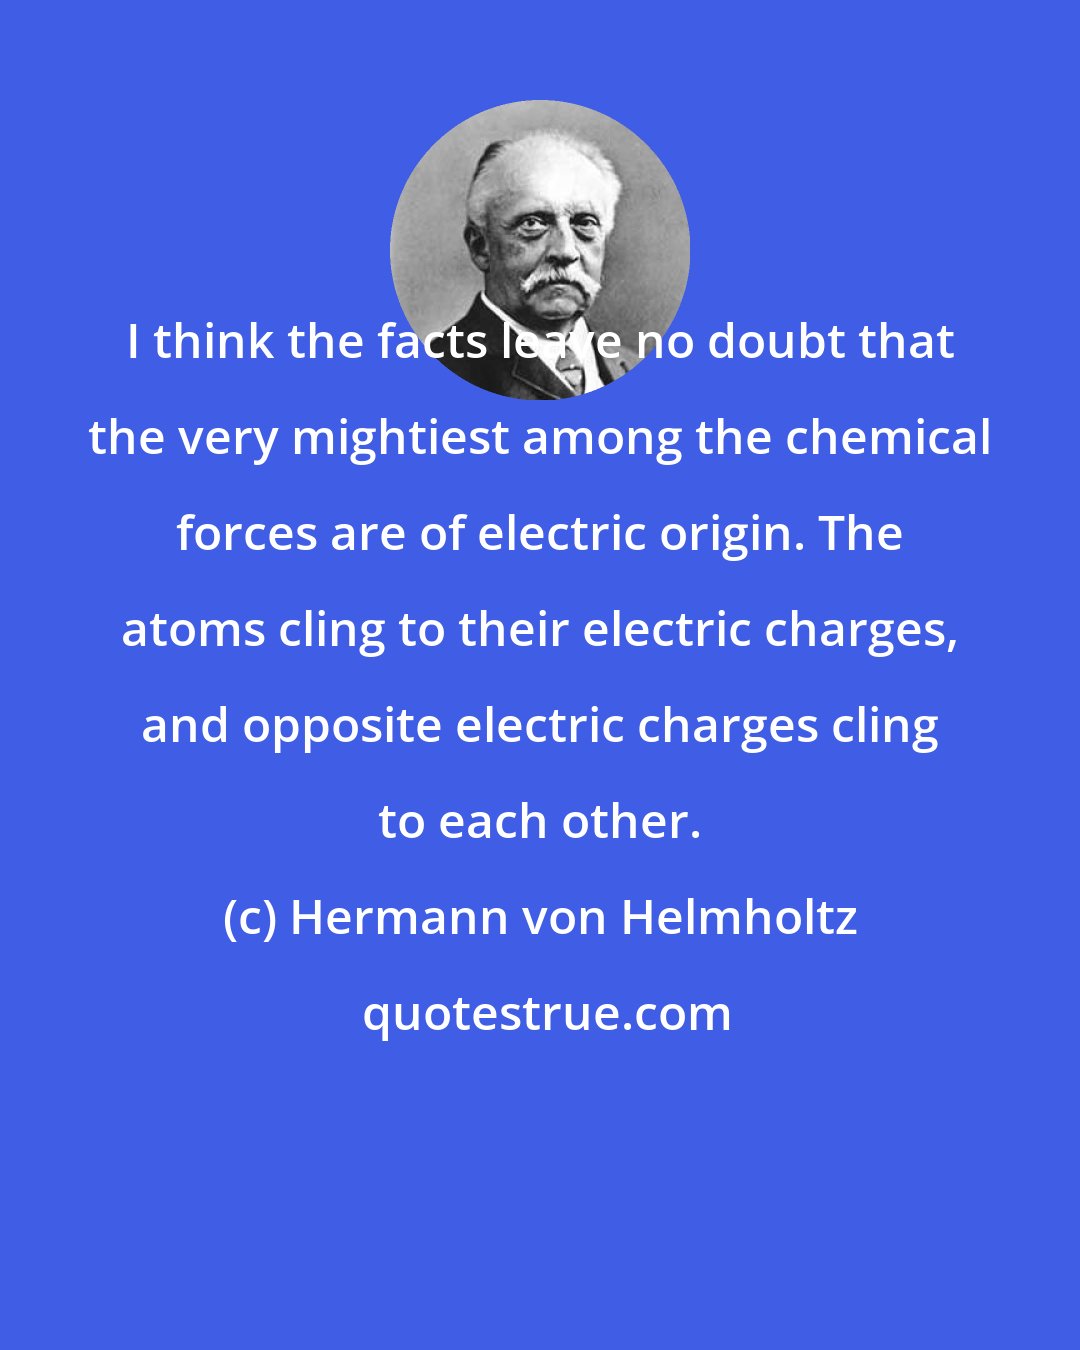 Hermann von Helmholtz: I think the facts leave no doubt that the very mightiest among the chemical forces are of electric origin. The atoms cling to their electric charges, and opposite electric charges cling to each other.